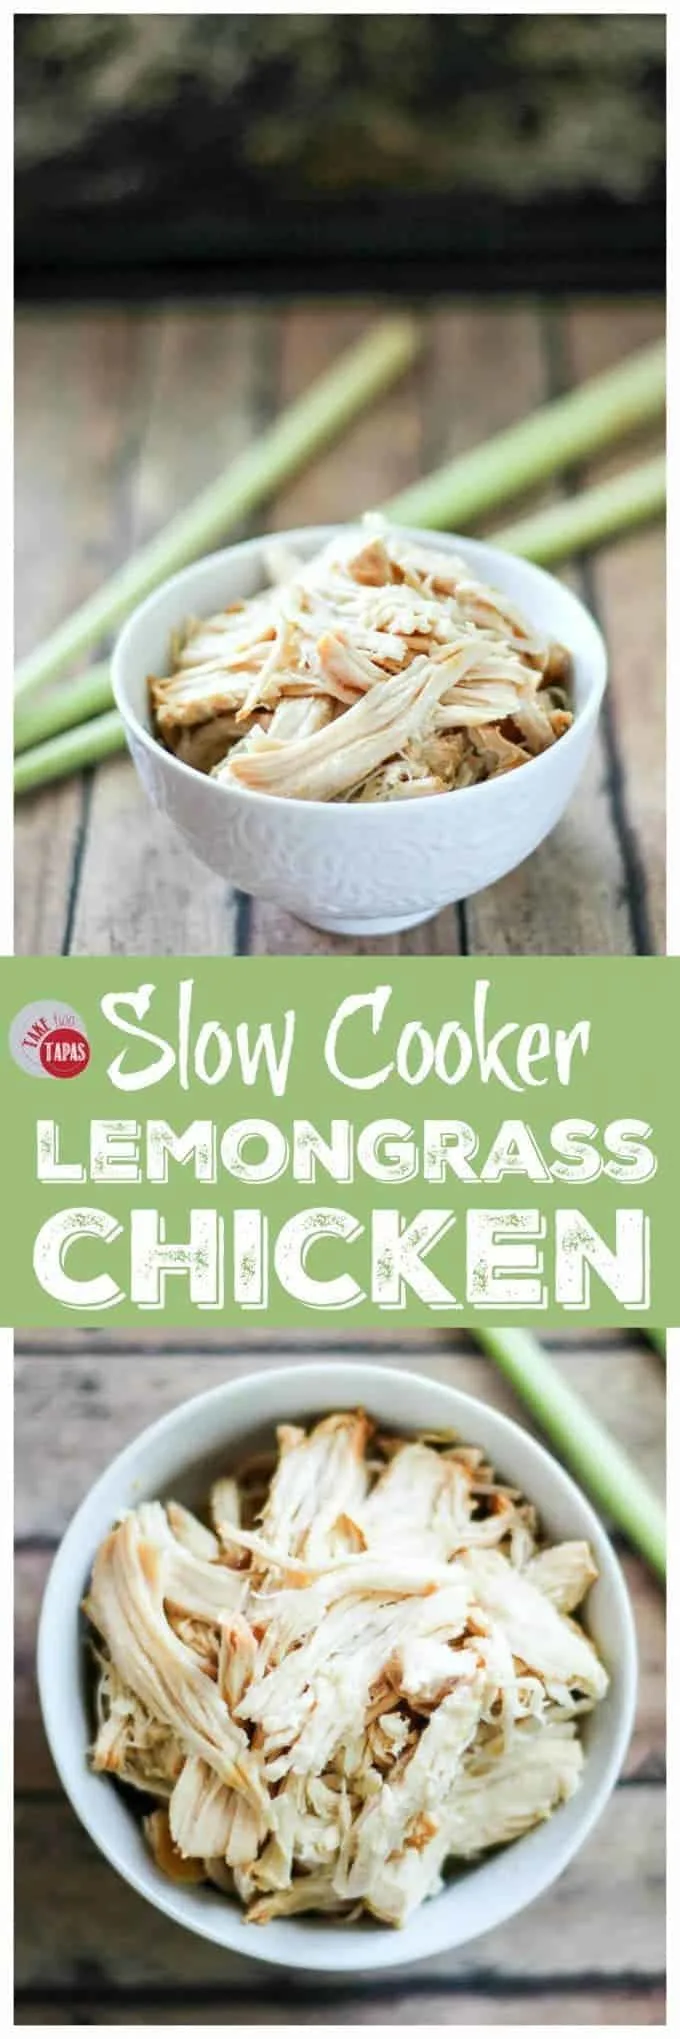 Pinterest collage image with text "slow cooker lemongrass chicken"